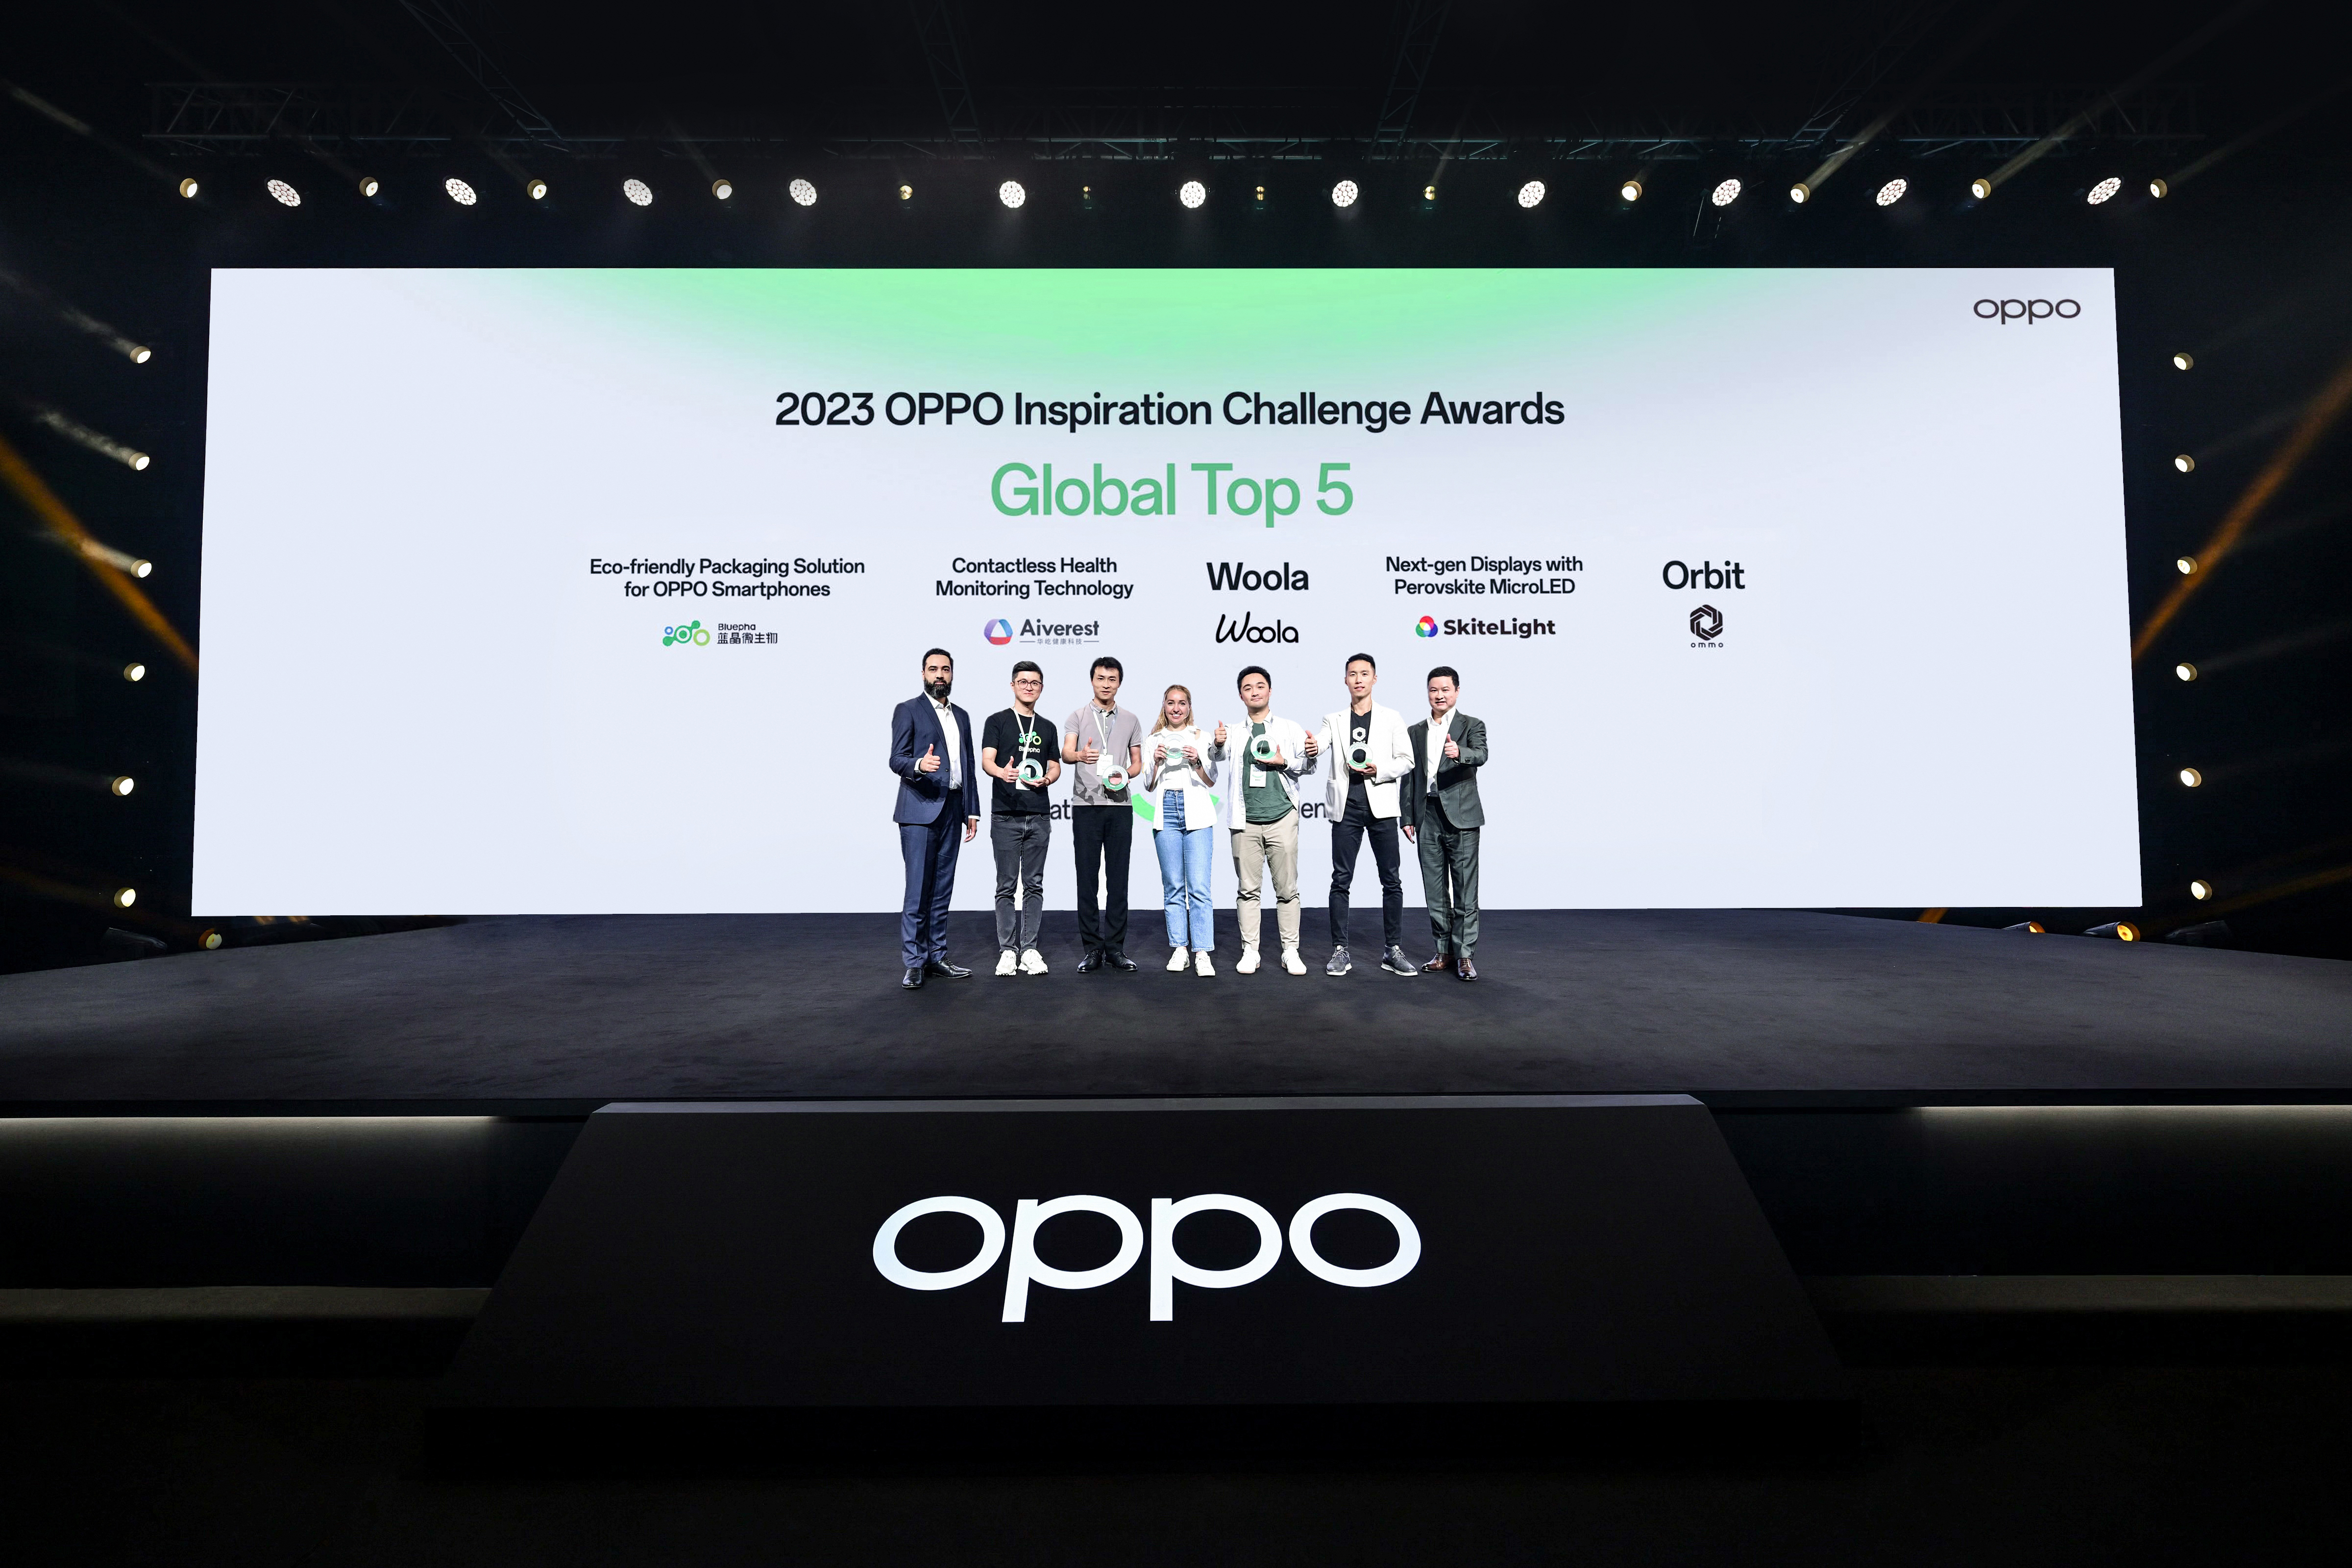 The five winning teams of the 2023 OPPO Inspiration Challenge